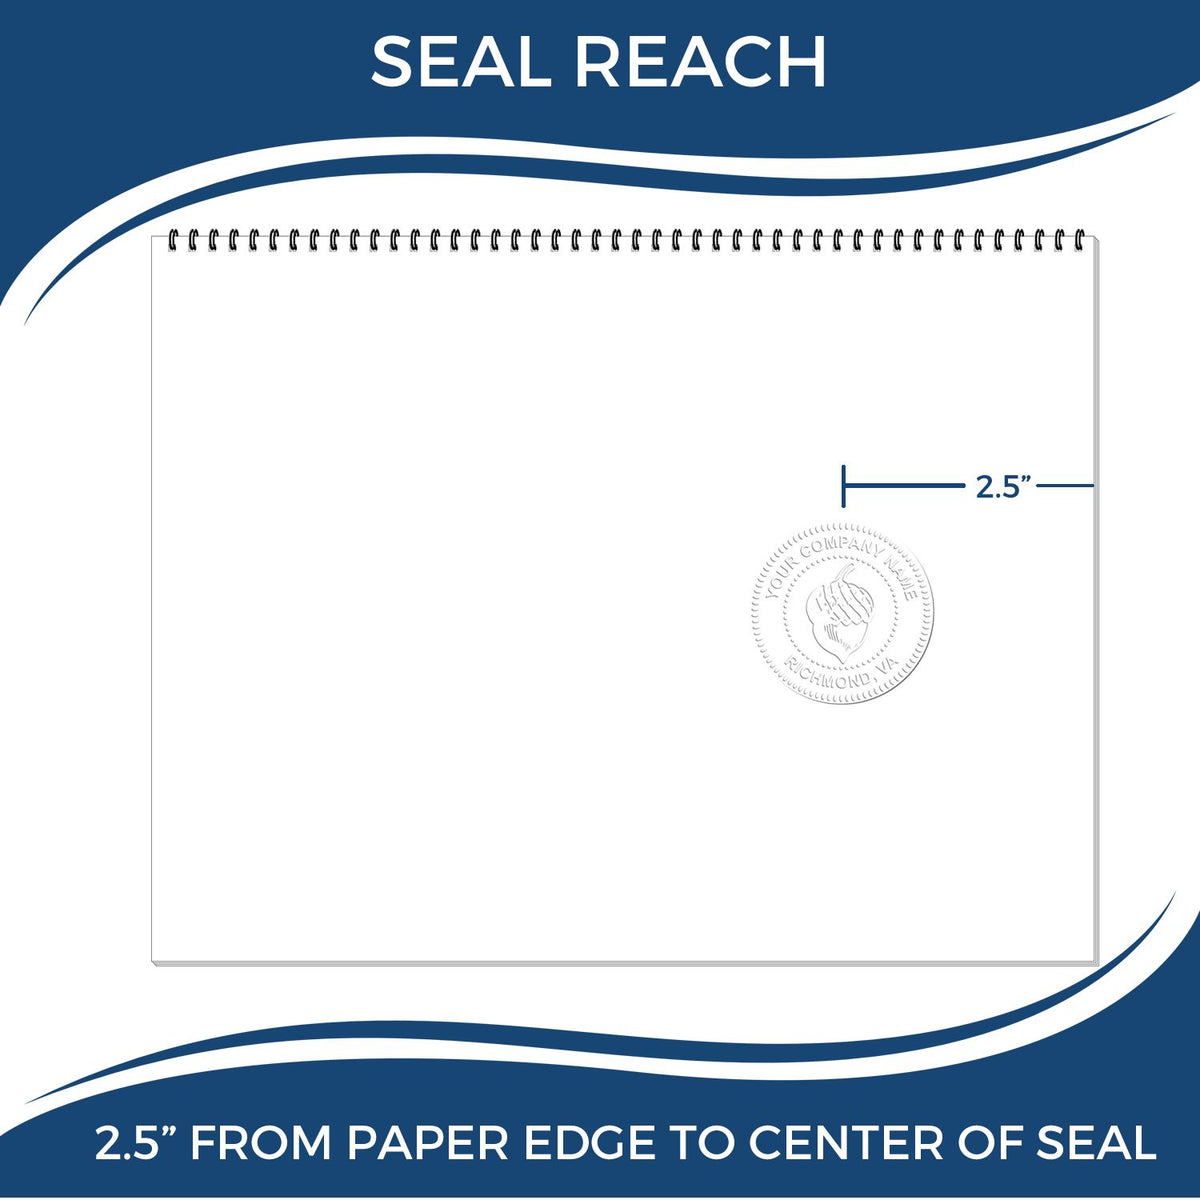 An infographic showing the seal reach which is represented by a ruler and a miniature seal image of the Heavy Duty Cast Iron Maine Architect Embosser